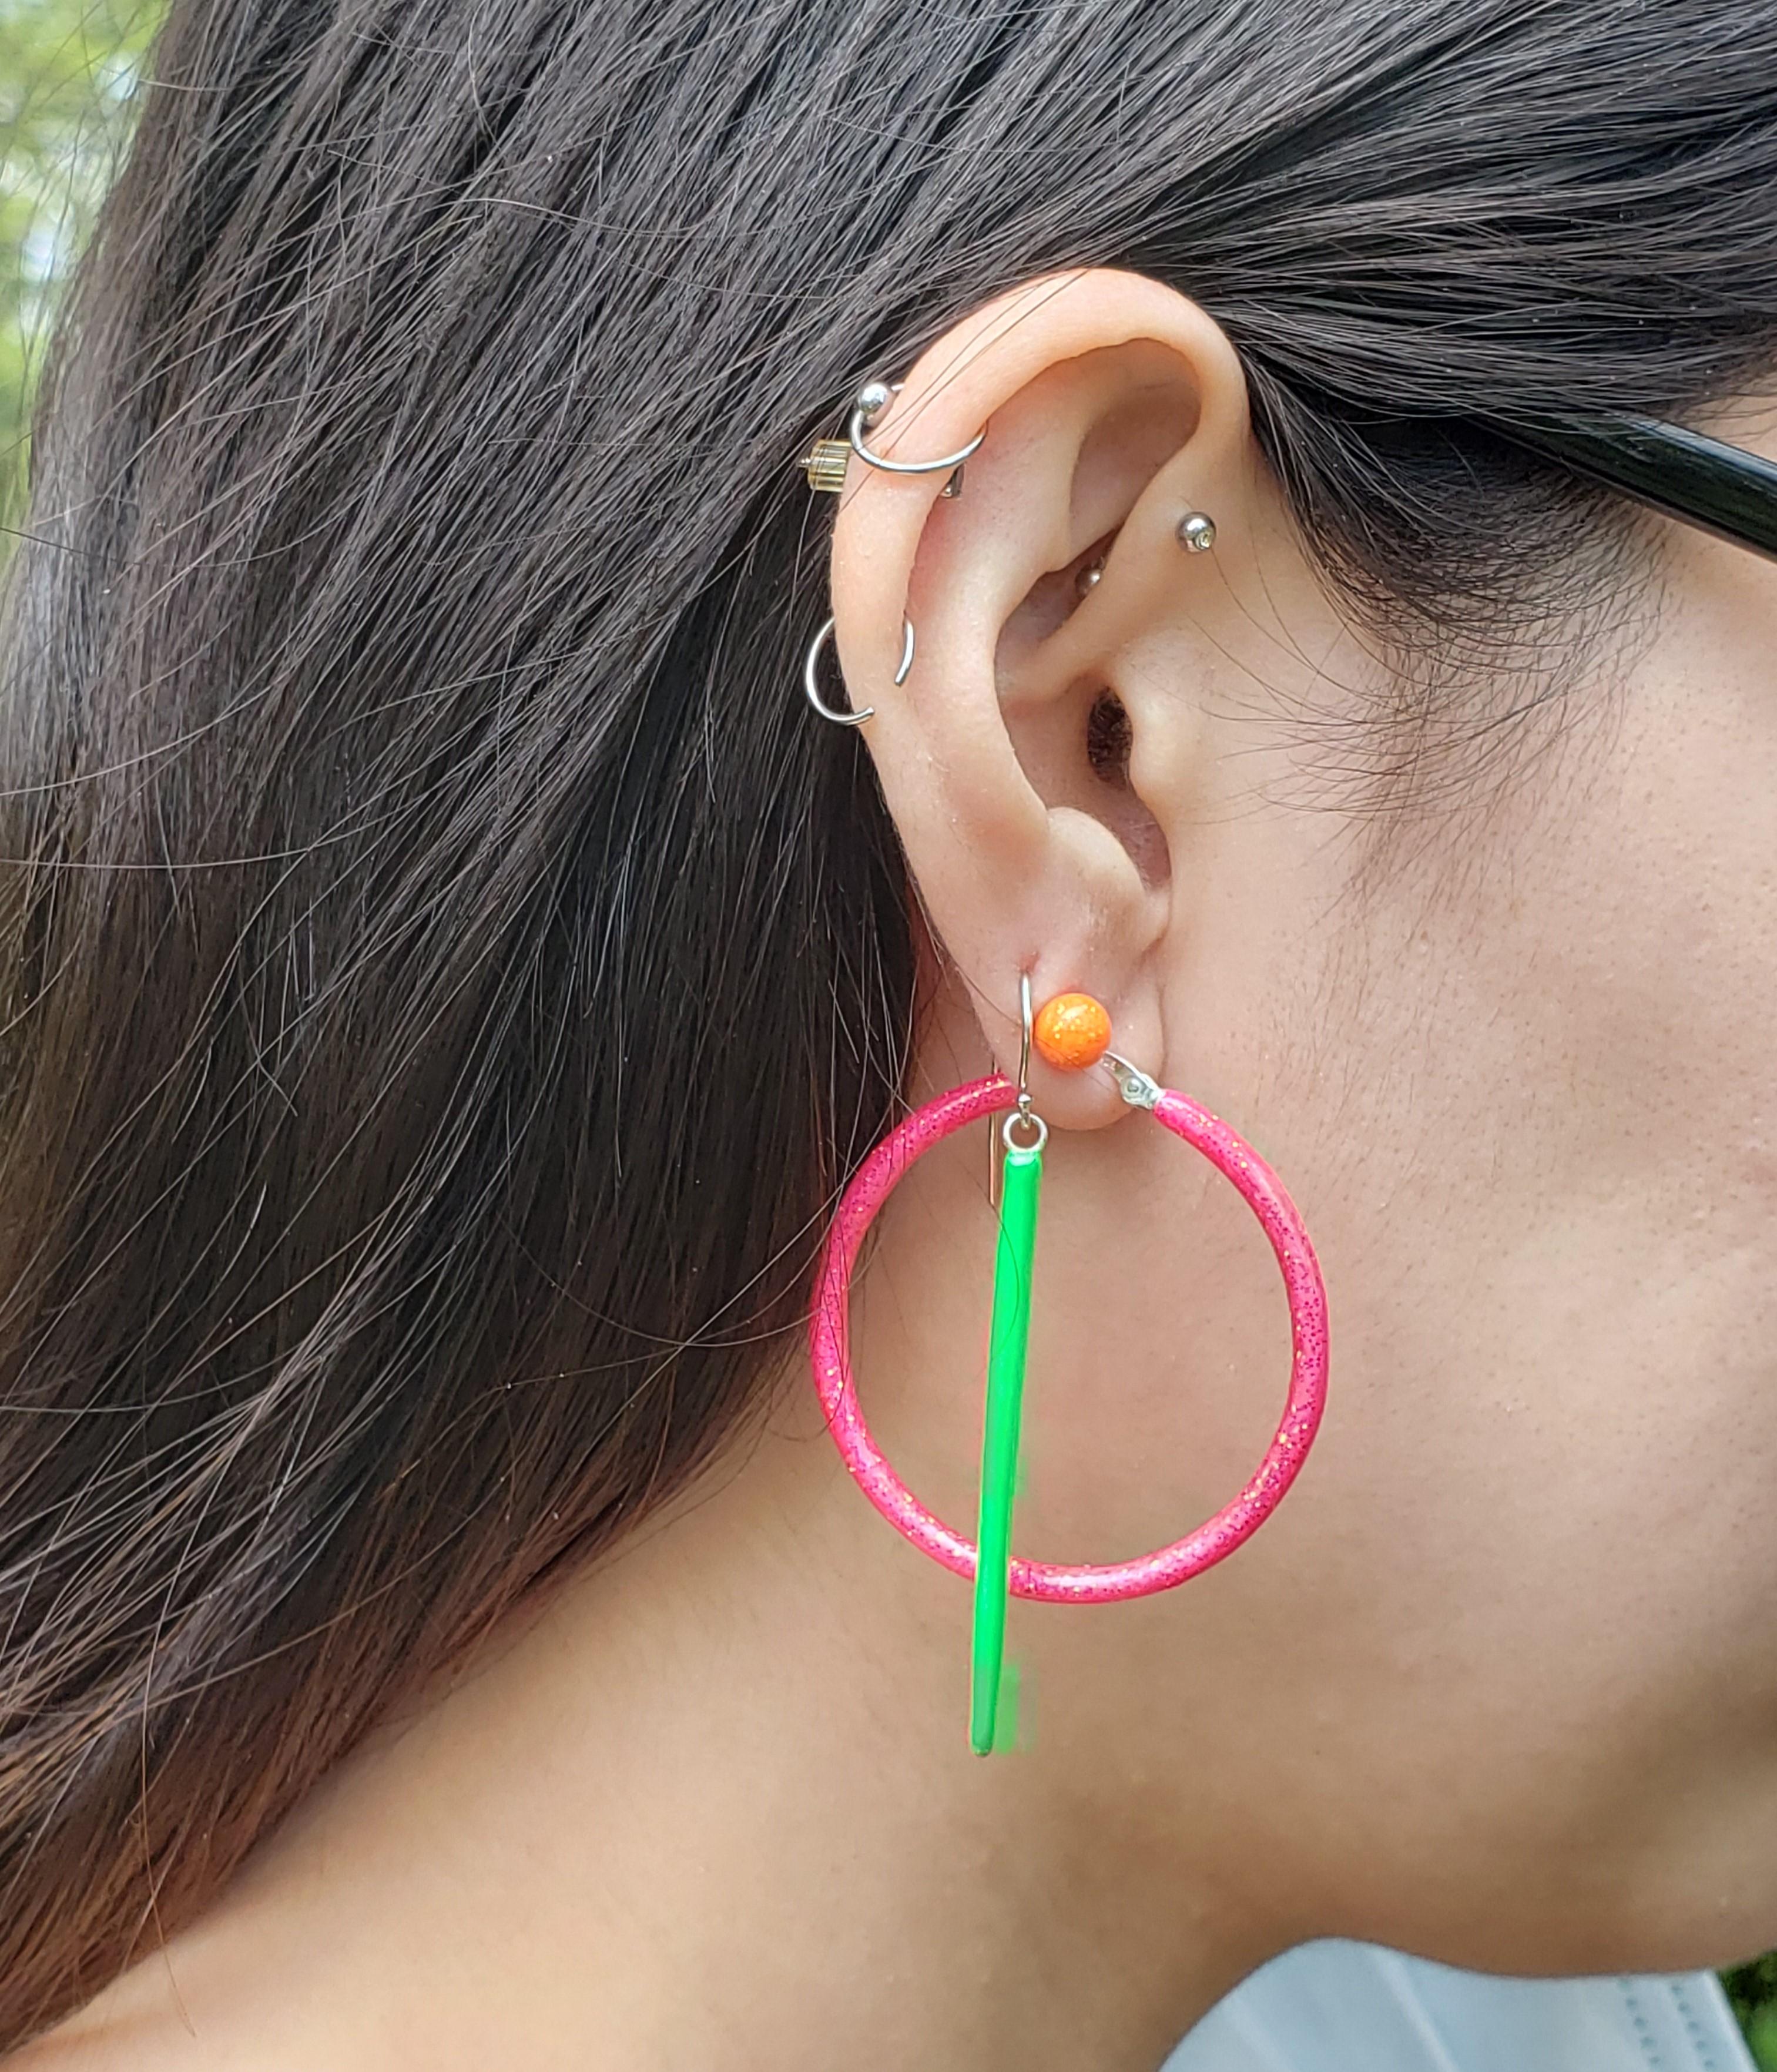 Edgy Neon Green Enamel Sterling Silver Spike earring handmade with a diamond set in a bagel setting to dangle off the spike. The Earring is in complete motion since the Spike is linked into the dangle diamond and then attached to a eurowire.
The